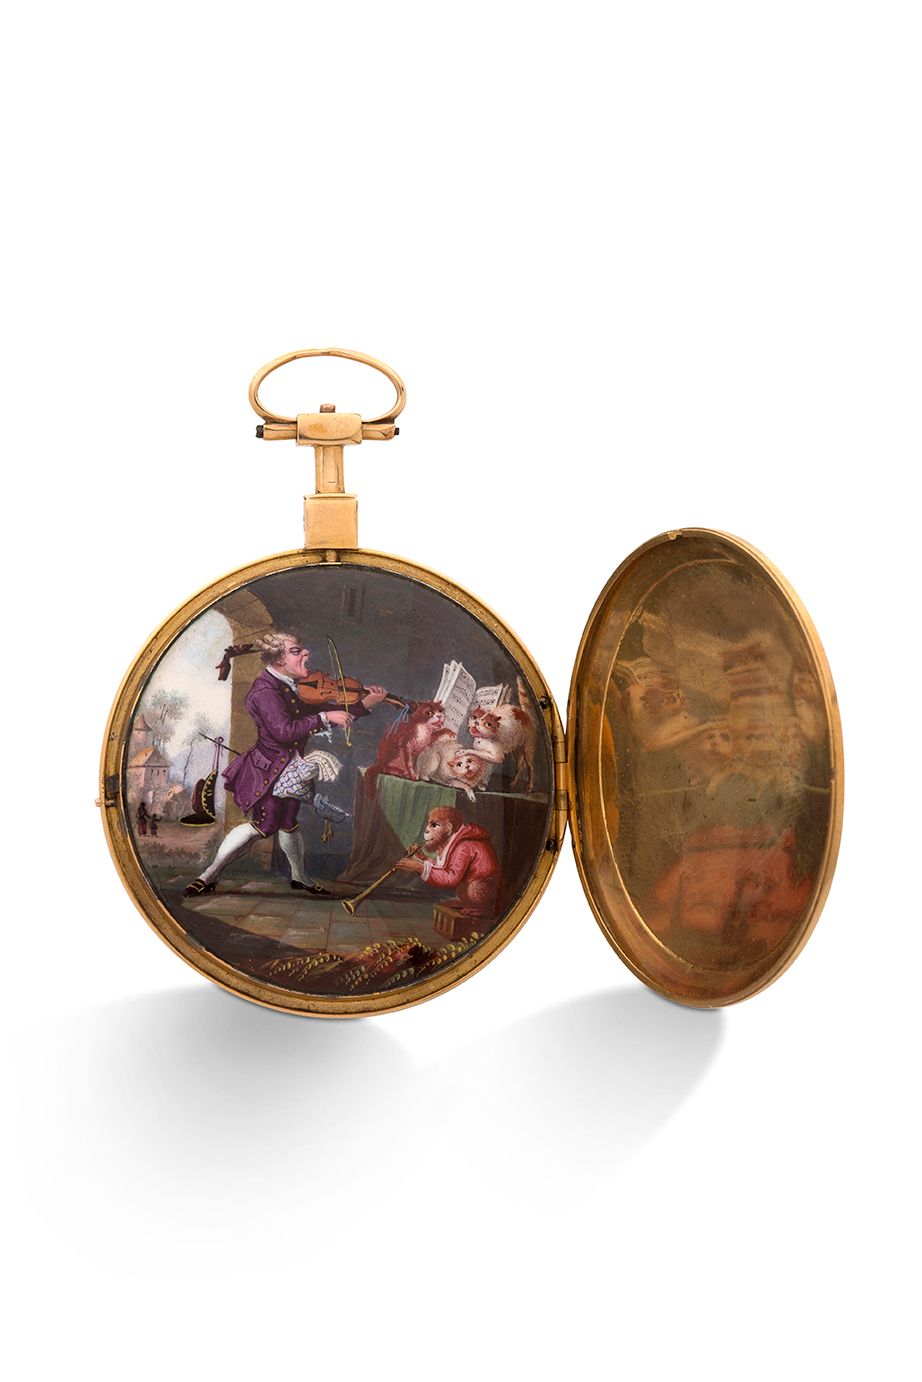 ANONYME 
Gold watch with enamel scene hidden on the back in a secret compartment&hellip;